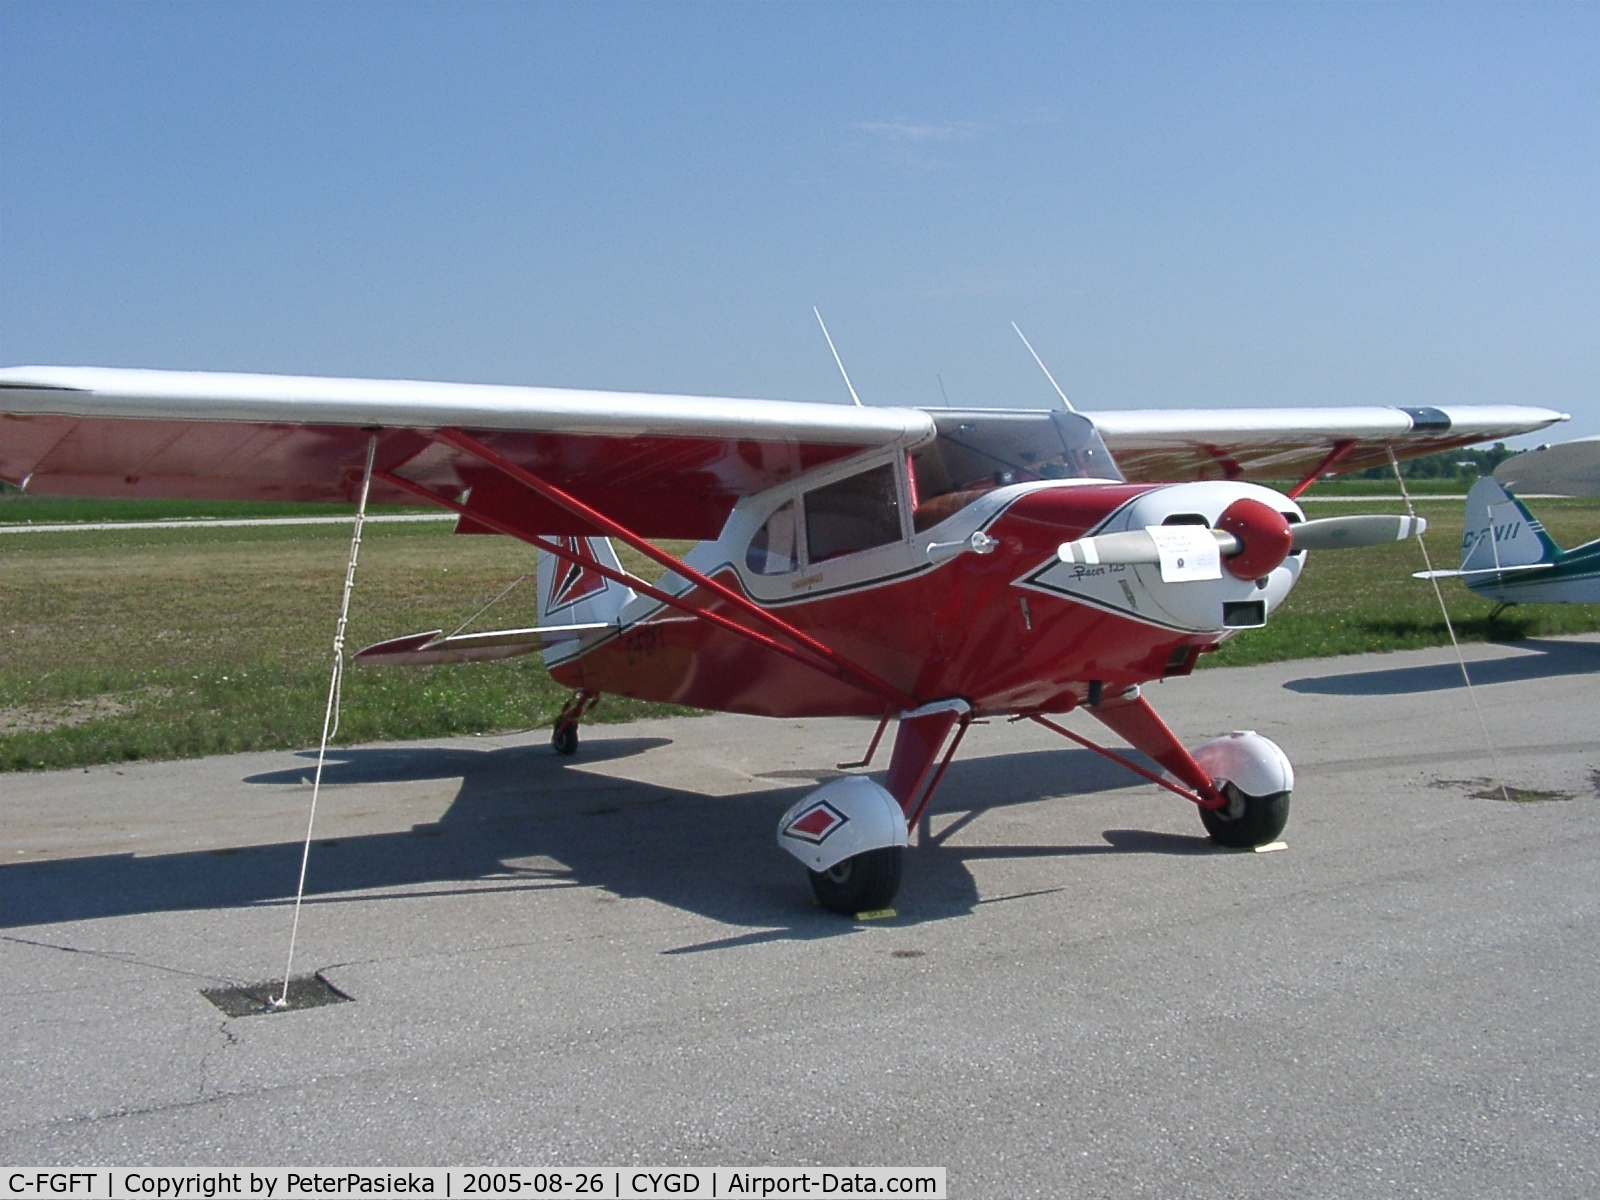 C-FGFT, 1952 Piper PA-20 Pacer C/N 20-854, @ Goderich Airport, ON Canada